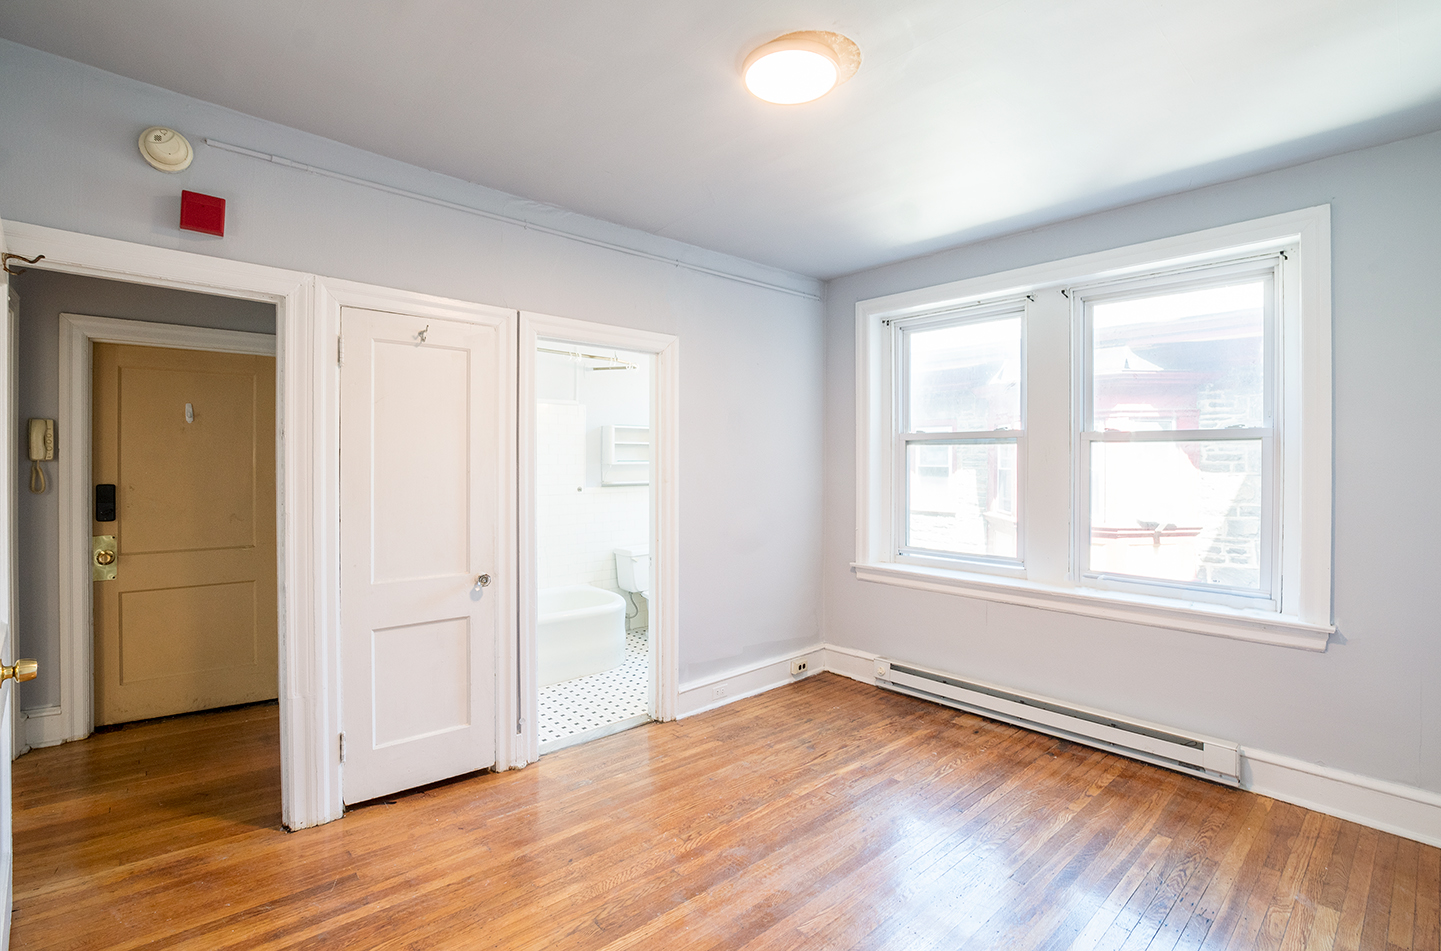 Property Photo For 2115 N. 63rd St, Unit 2C